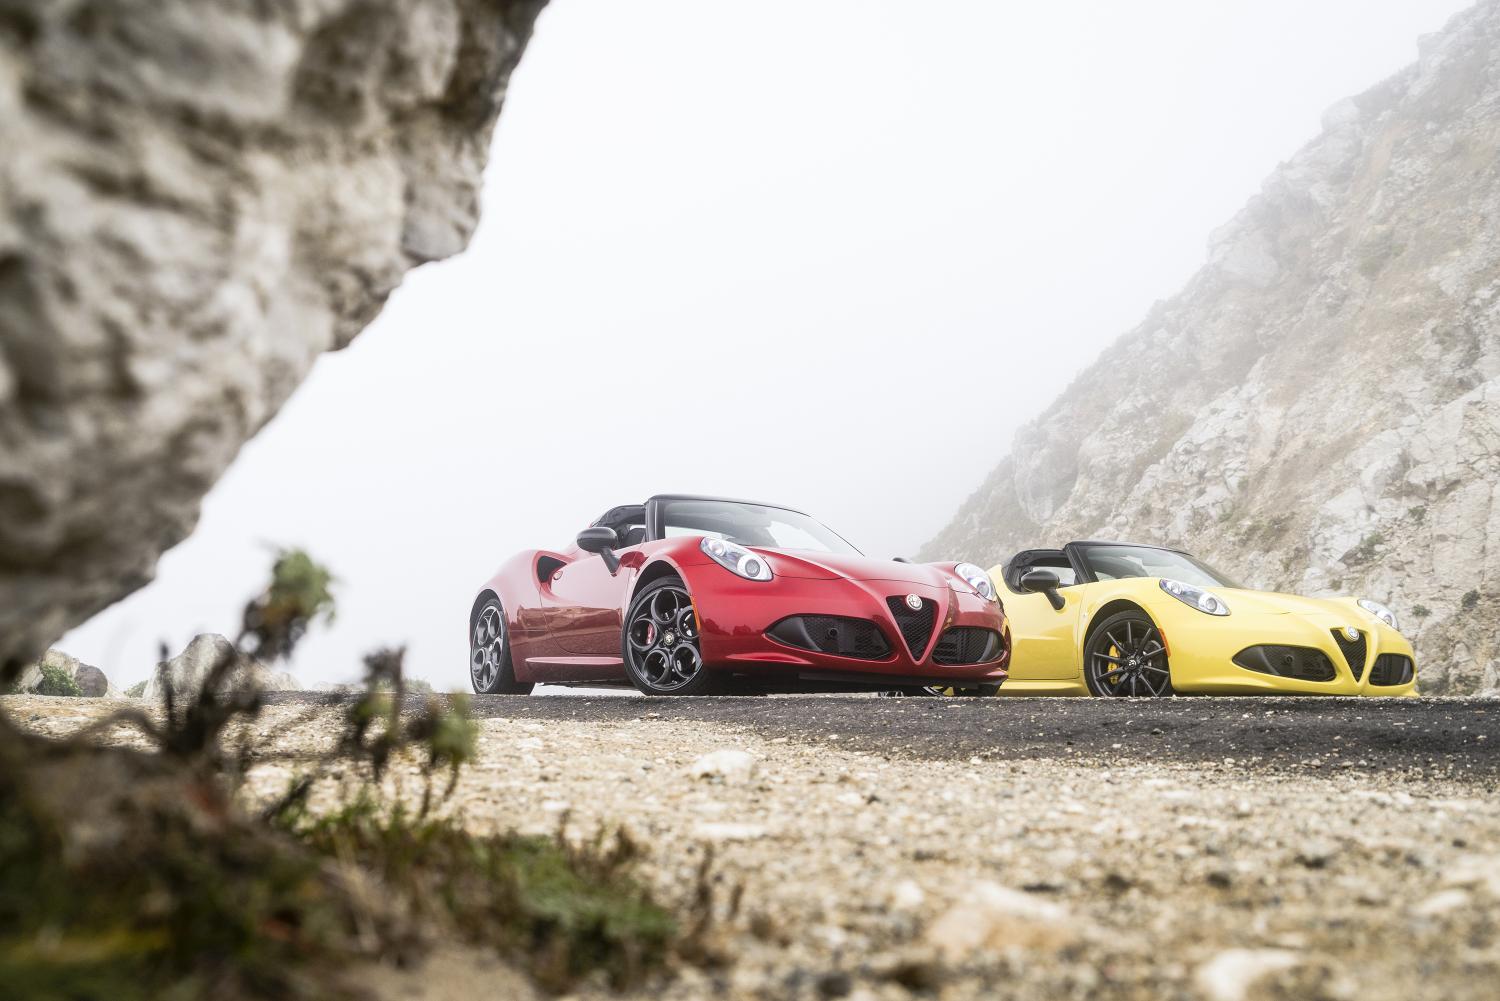 2015 Alfa Romeo 4C Spider Priced from $63,900 in the US